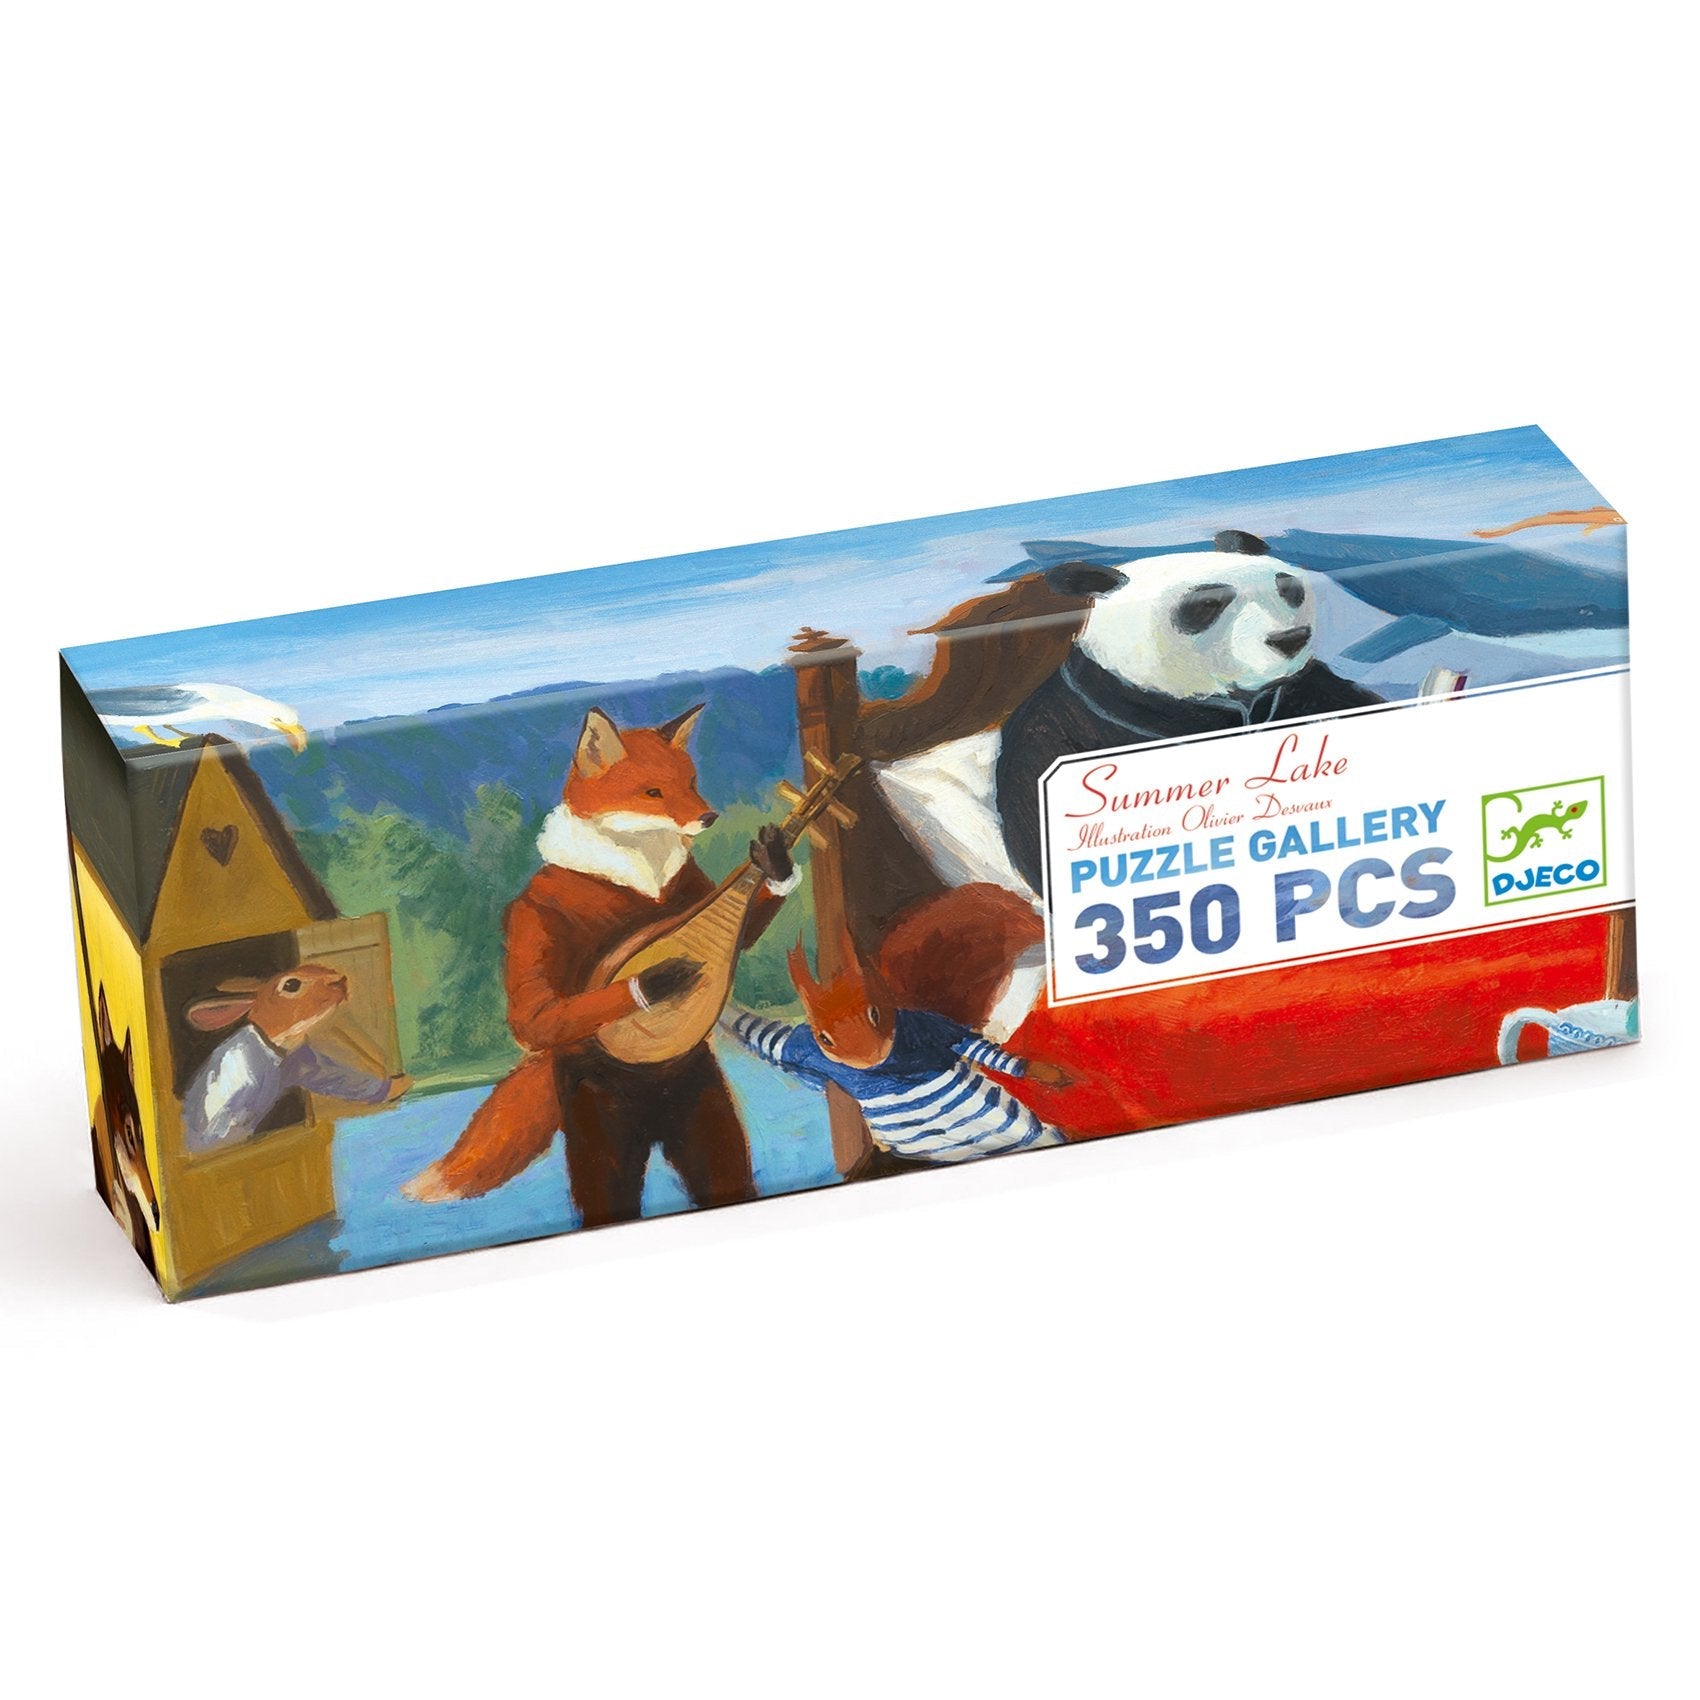 Djeco Hedgehog School 35Pc Observation Jigsaw Puzzle - The Toy Box